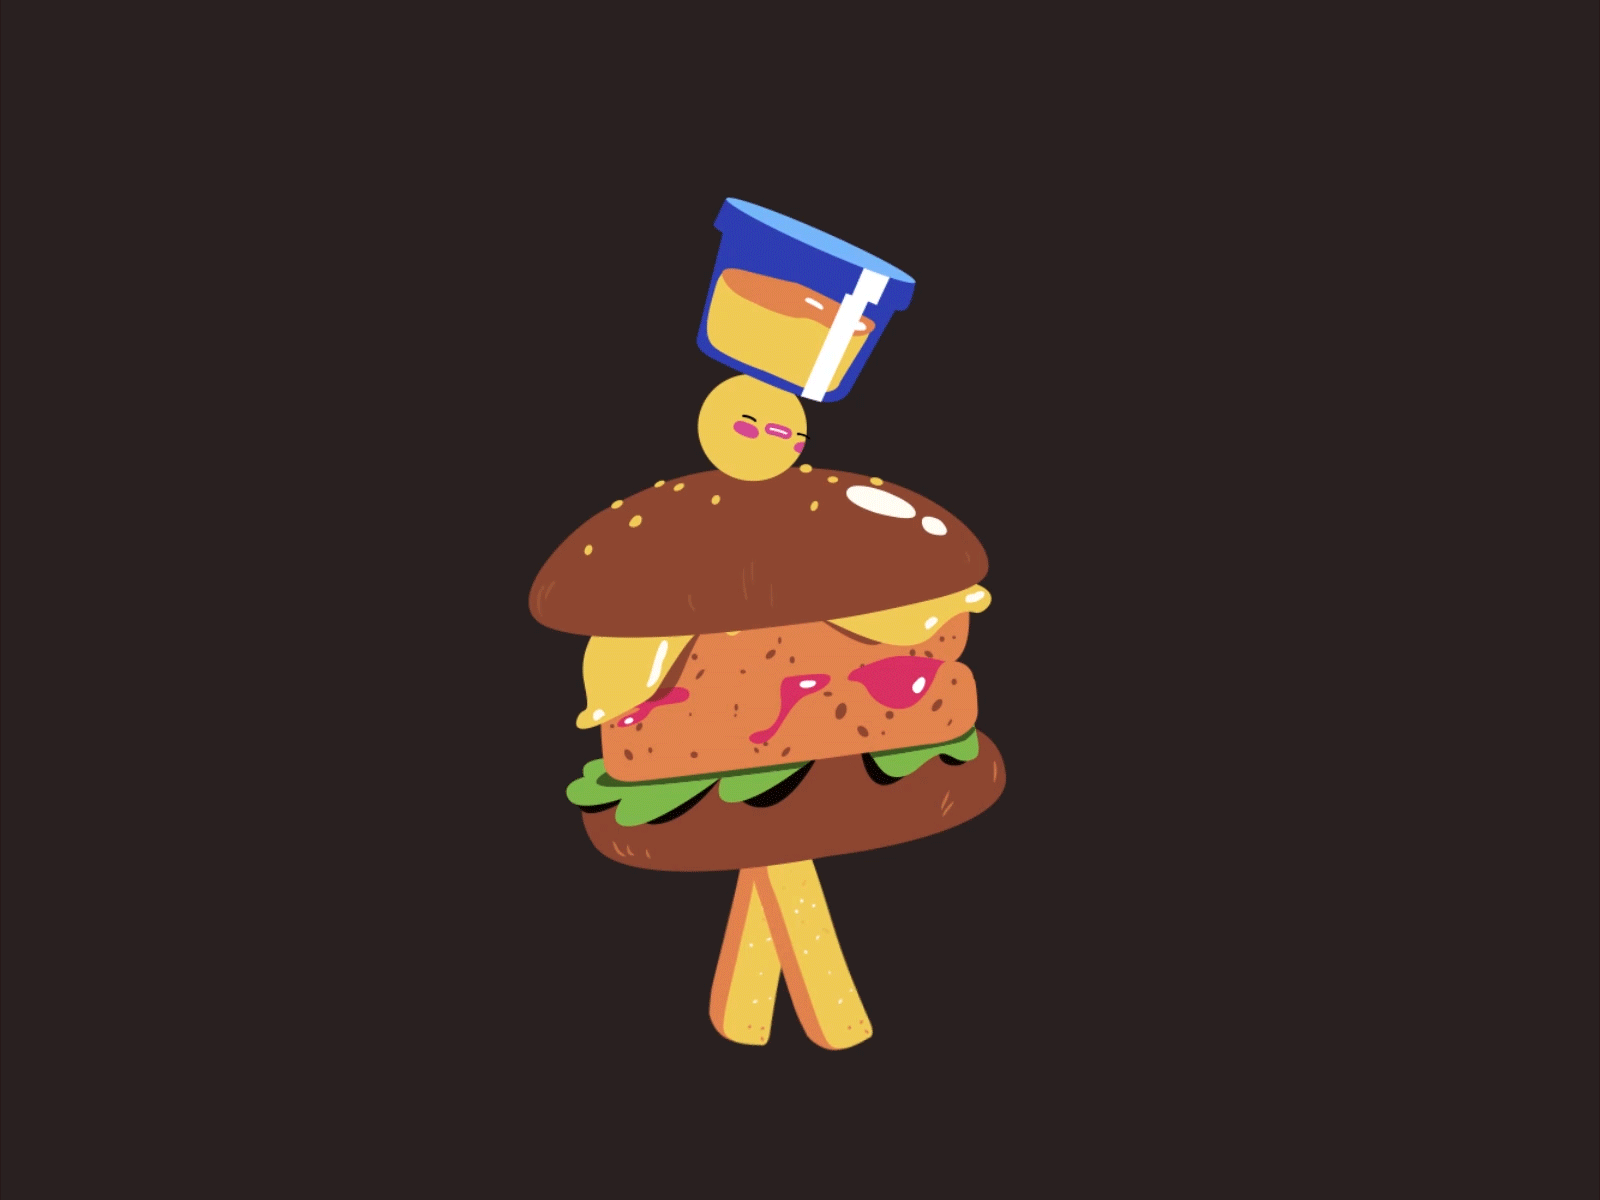 The Burger One